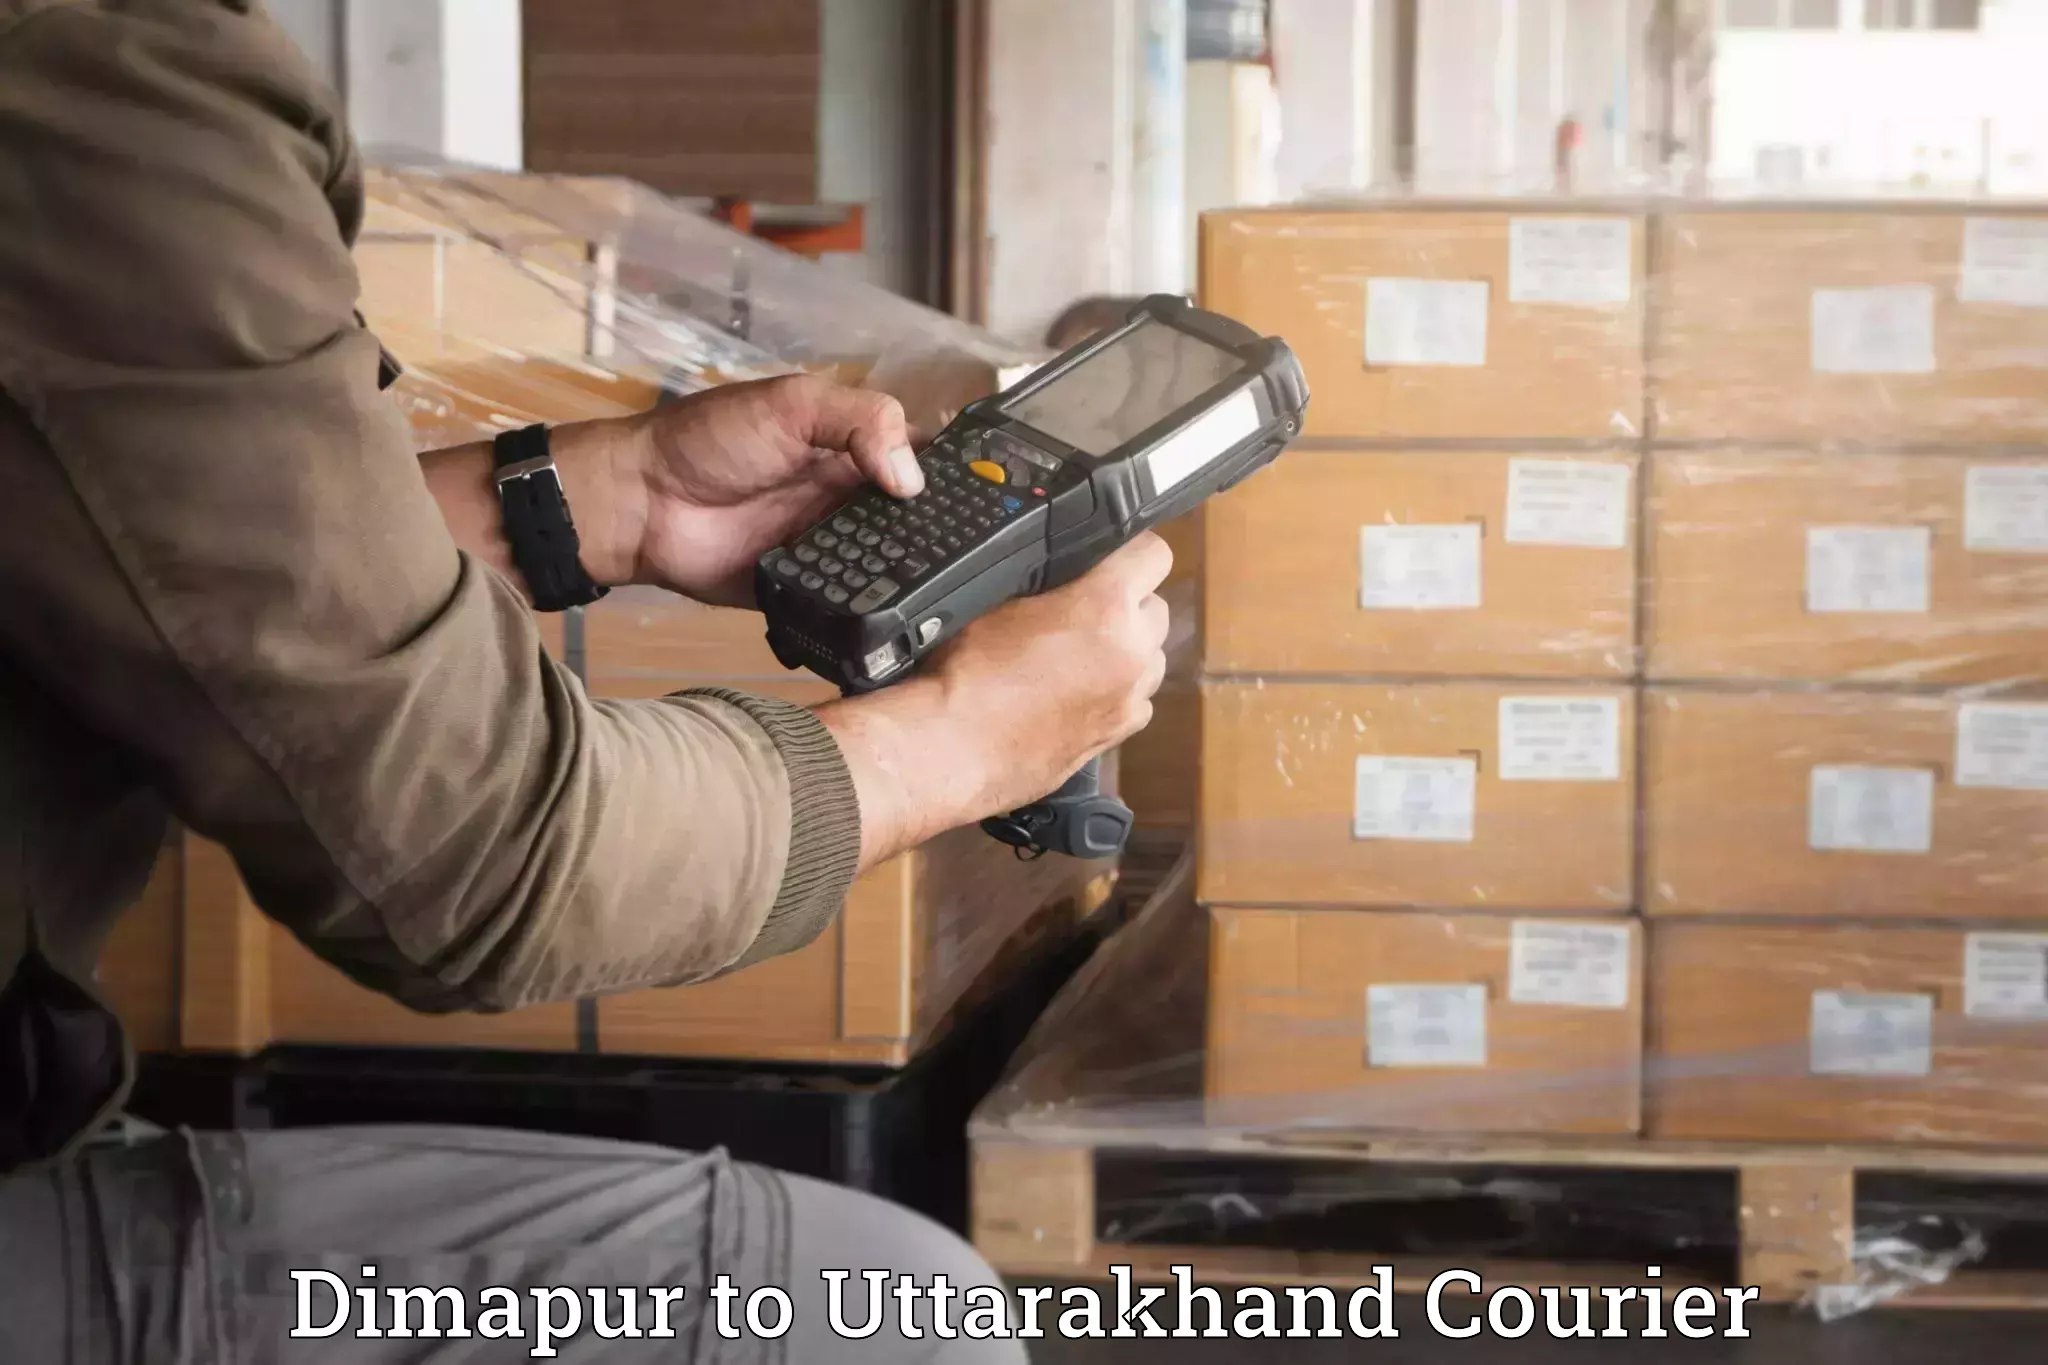 Specialized moving company Dimapur to Dwarahat